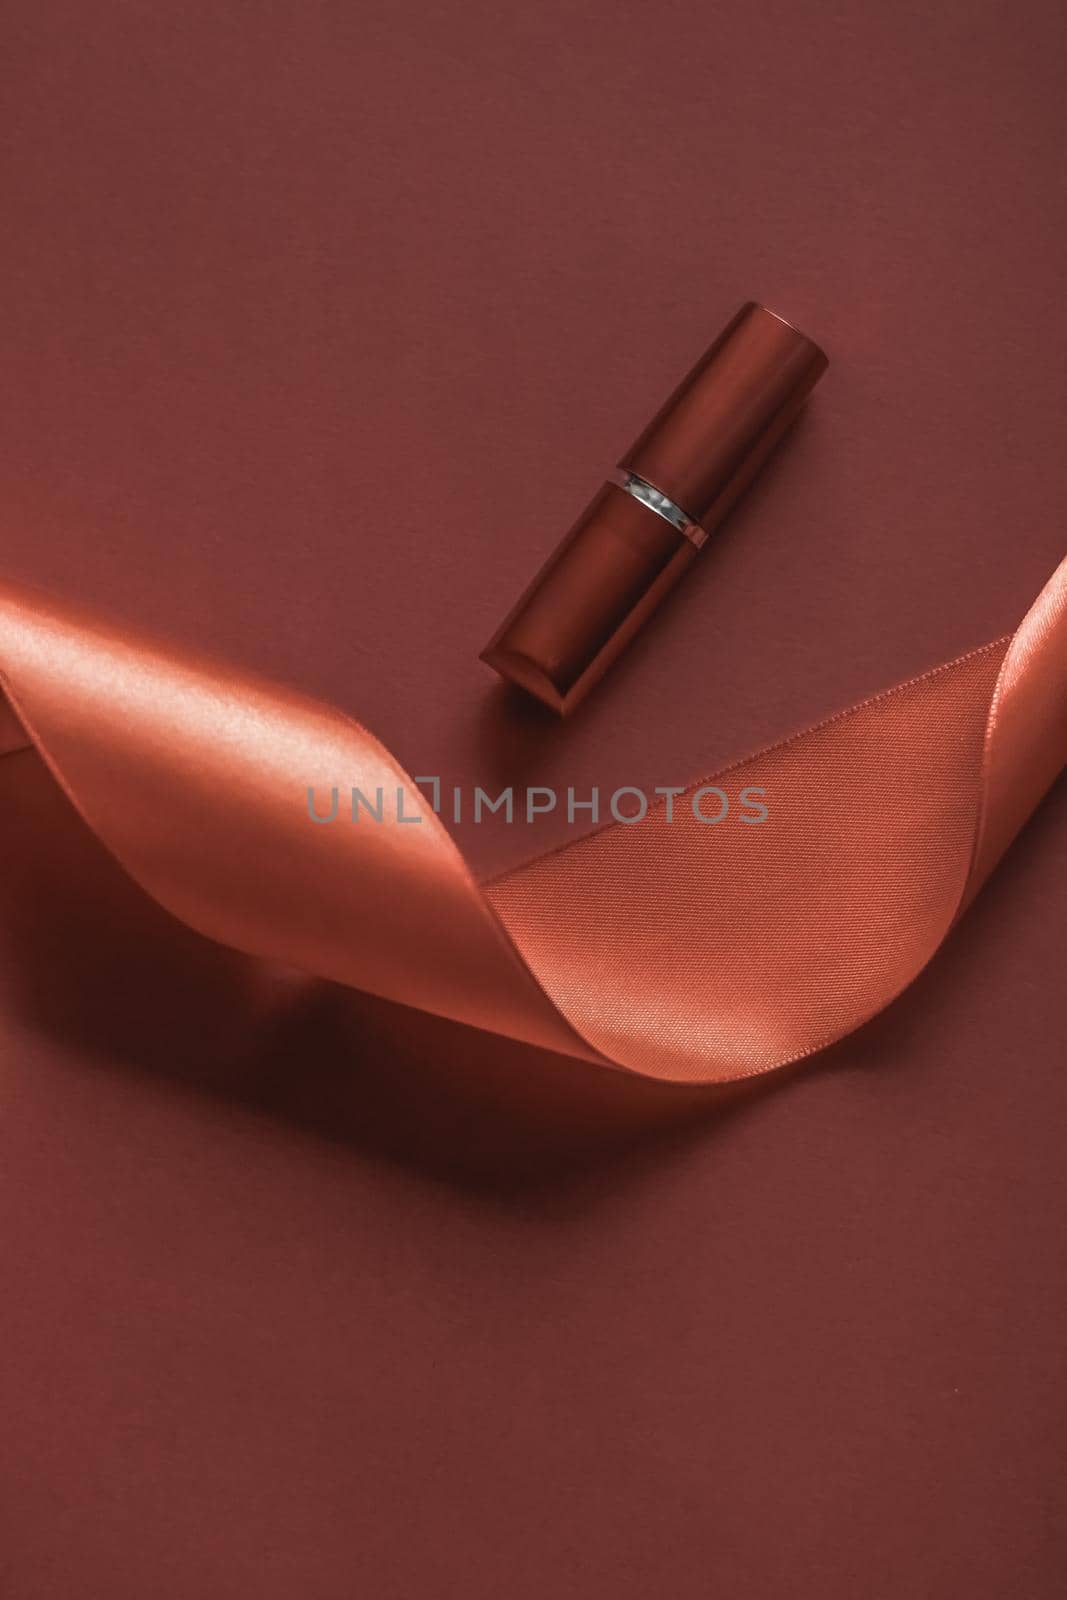 Cosmetic branding, glamour lip gloss and shopping sale concept - Luxury lipstick and silk ribbon on bronze holiday background, make-up and cosmetics flatlay for beauty brand product design